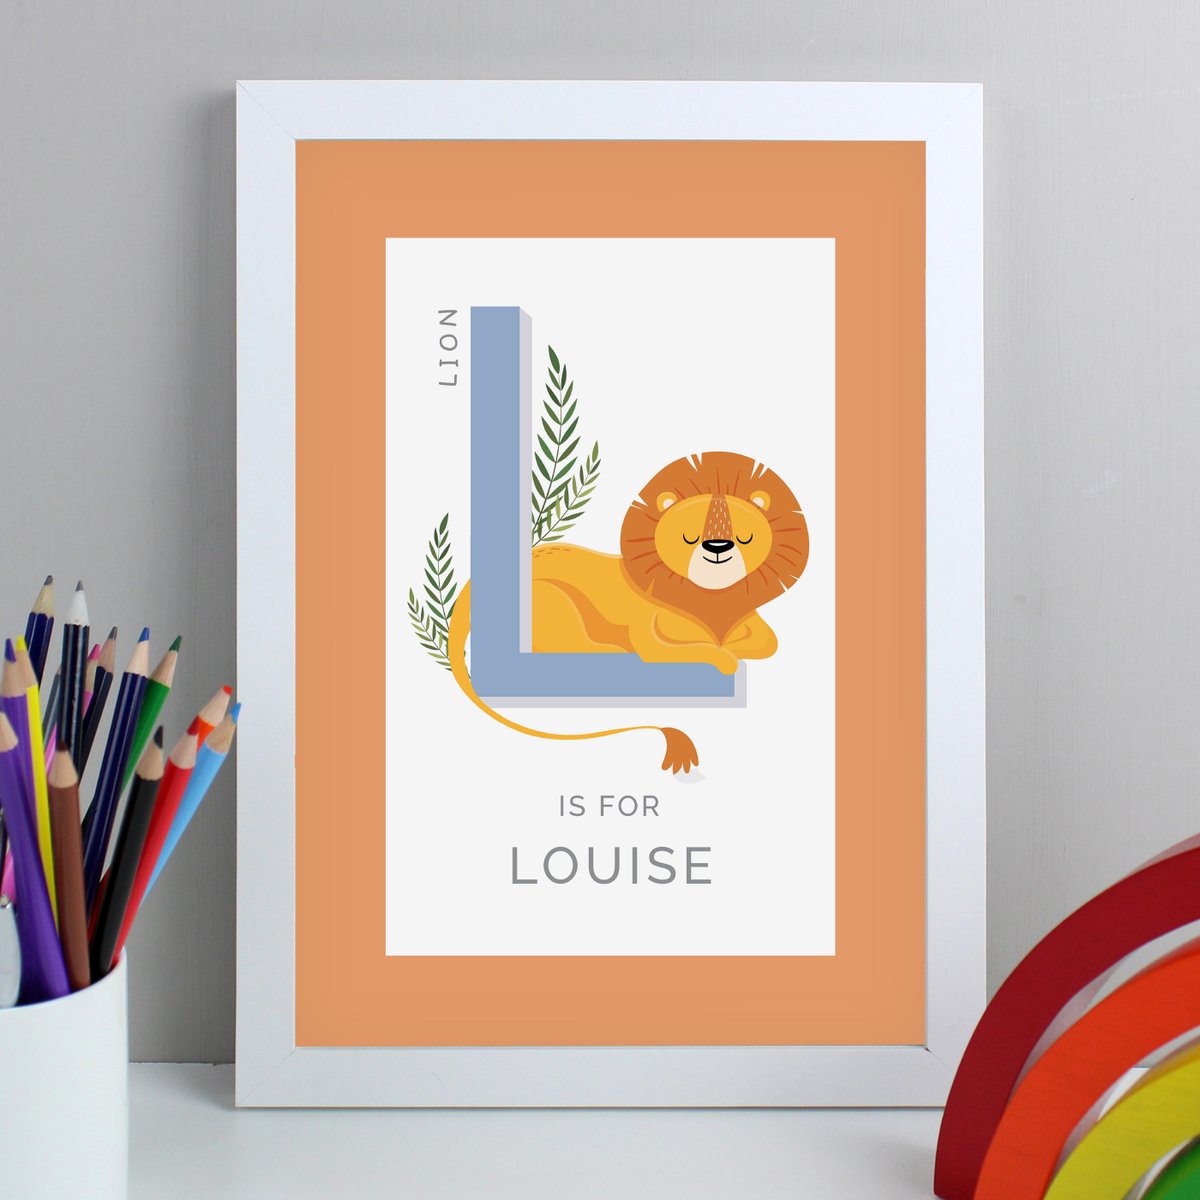 Personalised with an initial & name & decorated with an animal who's name begins with the same letter, this framed print would be a lovely addition to a child's room lilybluestore.com/products/perso… #giftideas #animalalphabet #elevenseshour #mhhsbd #EarlyBiz